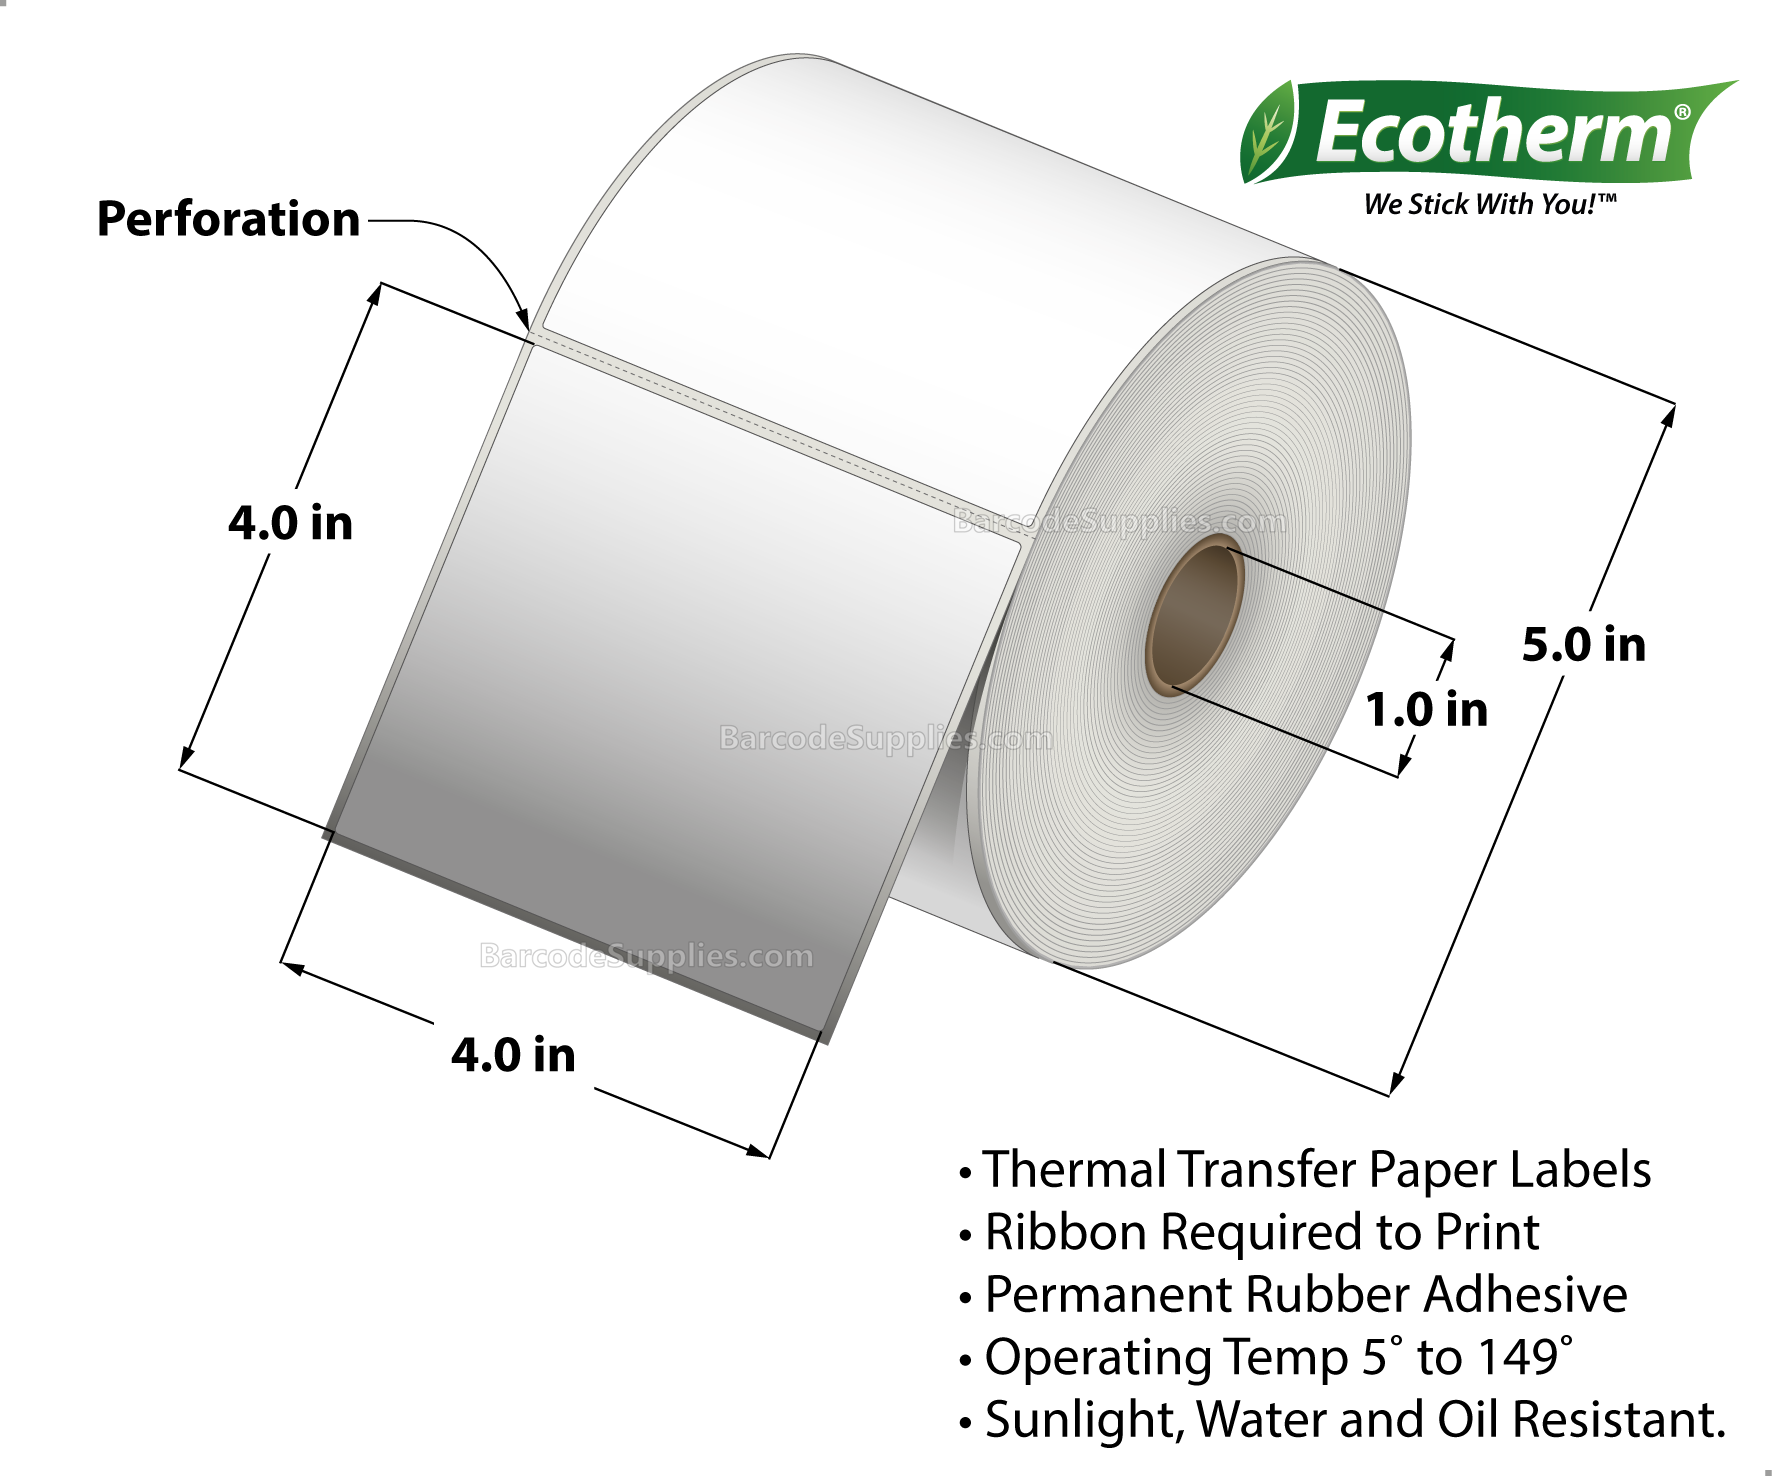 4 x 4 Thermal Transfer White Labels With Rubber Adhesive - Perforated - 700 Labels Per Roll - Carton Of 6 Rolls - 4200 Labels Total - MPN: TT5400400-1P-6